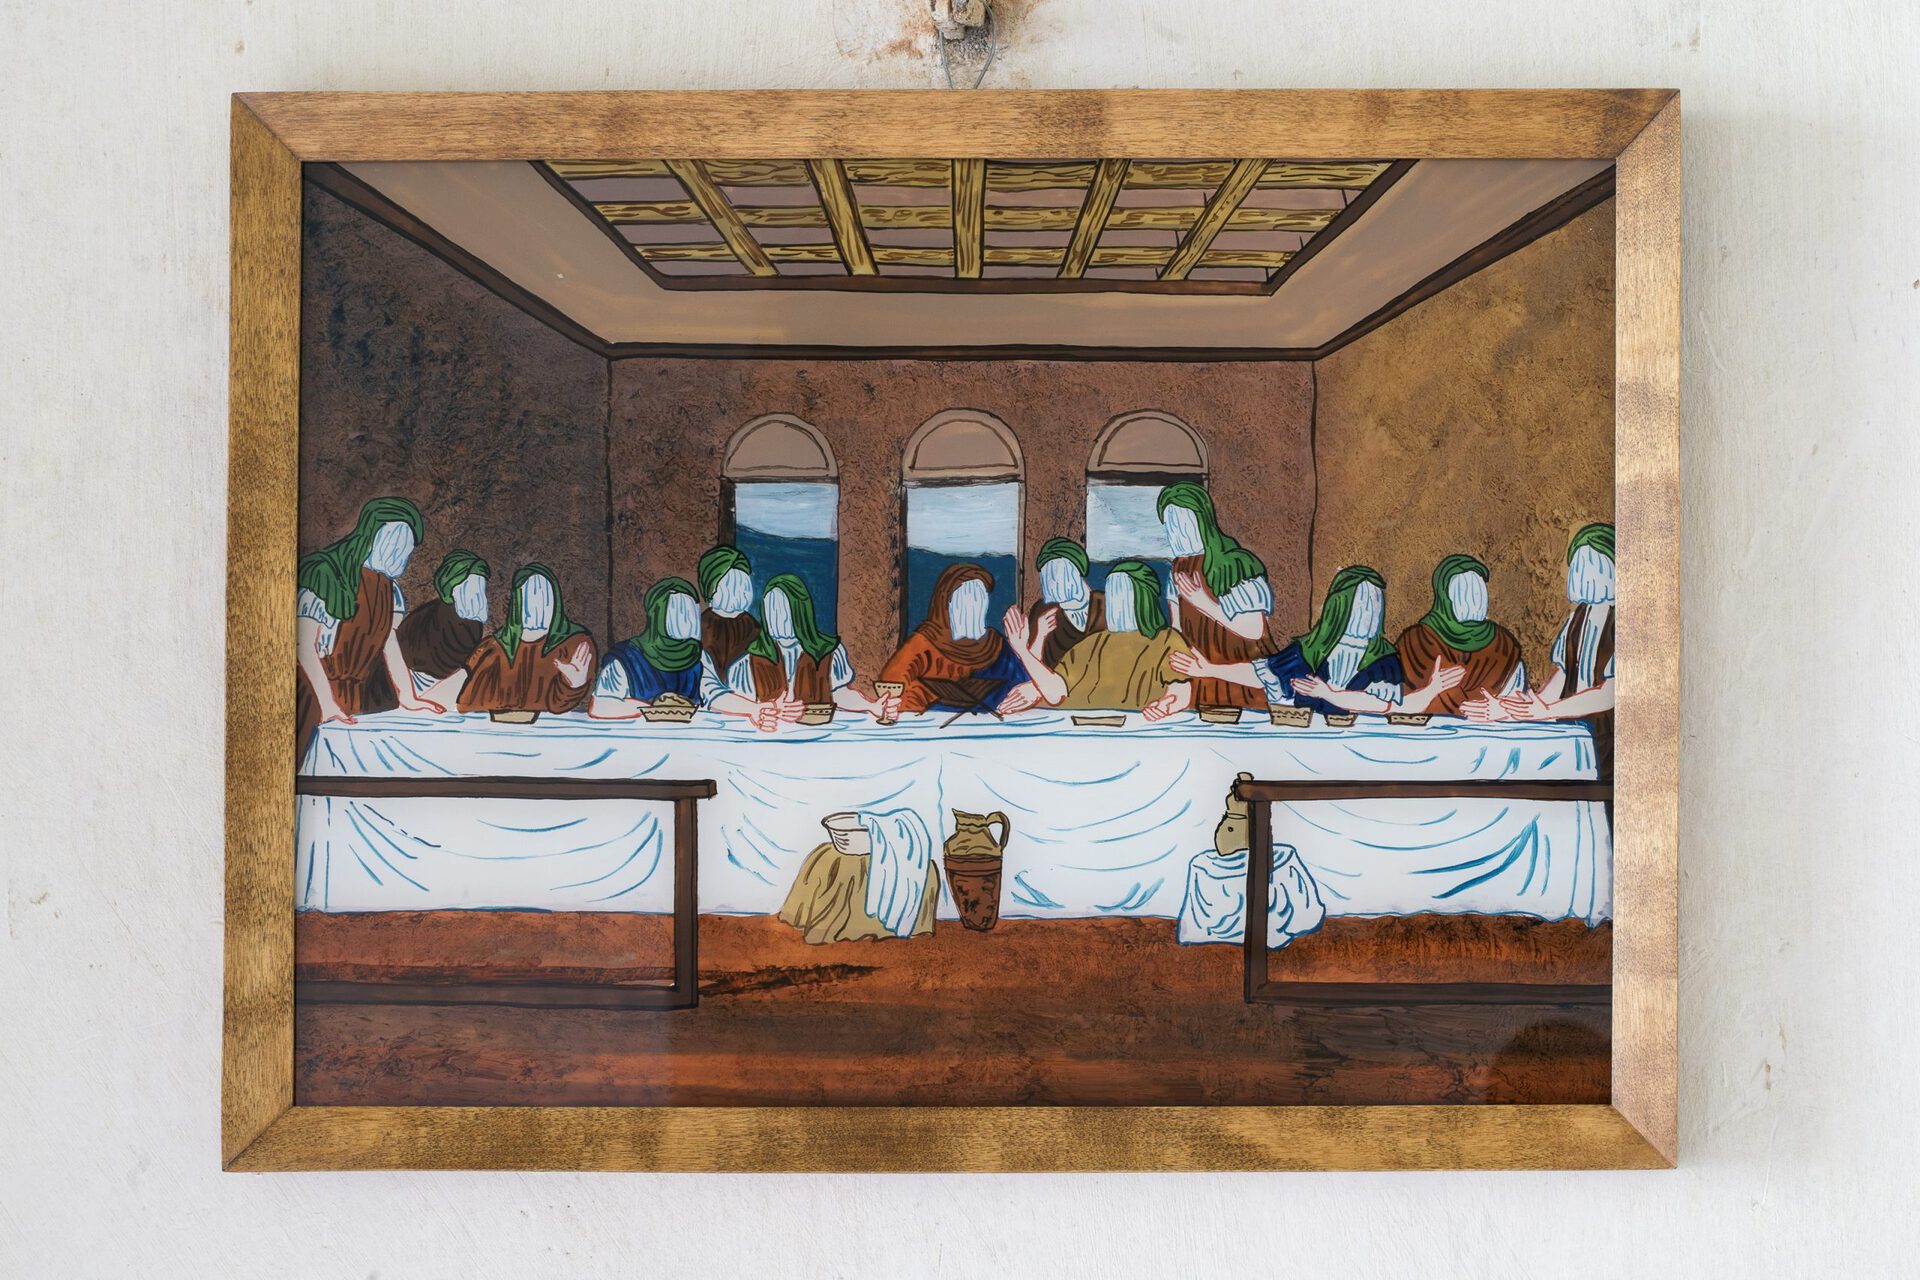 Slavs and Tatars, Communion (Ahl al-Apostles), 2021 reverse painting on glass with acrylic and synthetic paint 32 × 44 cm courtesy of the artists and Raster Gallery, Warsaw